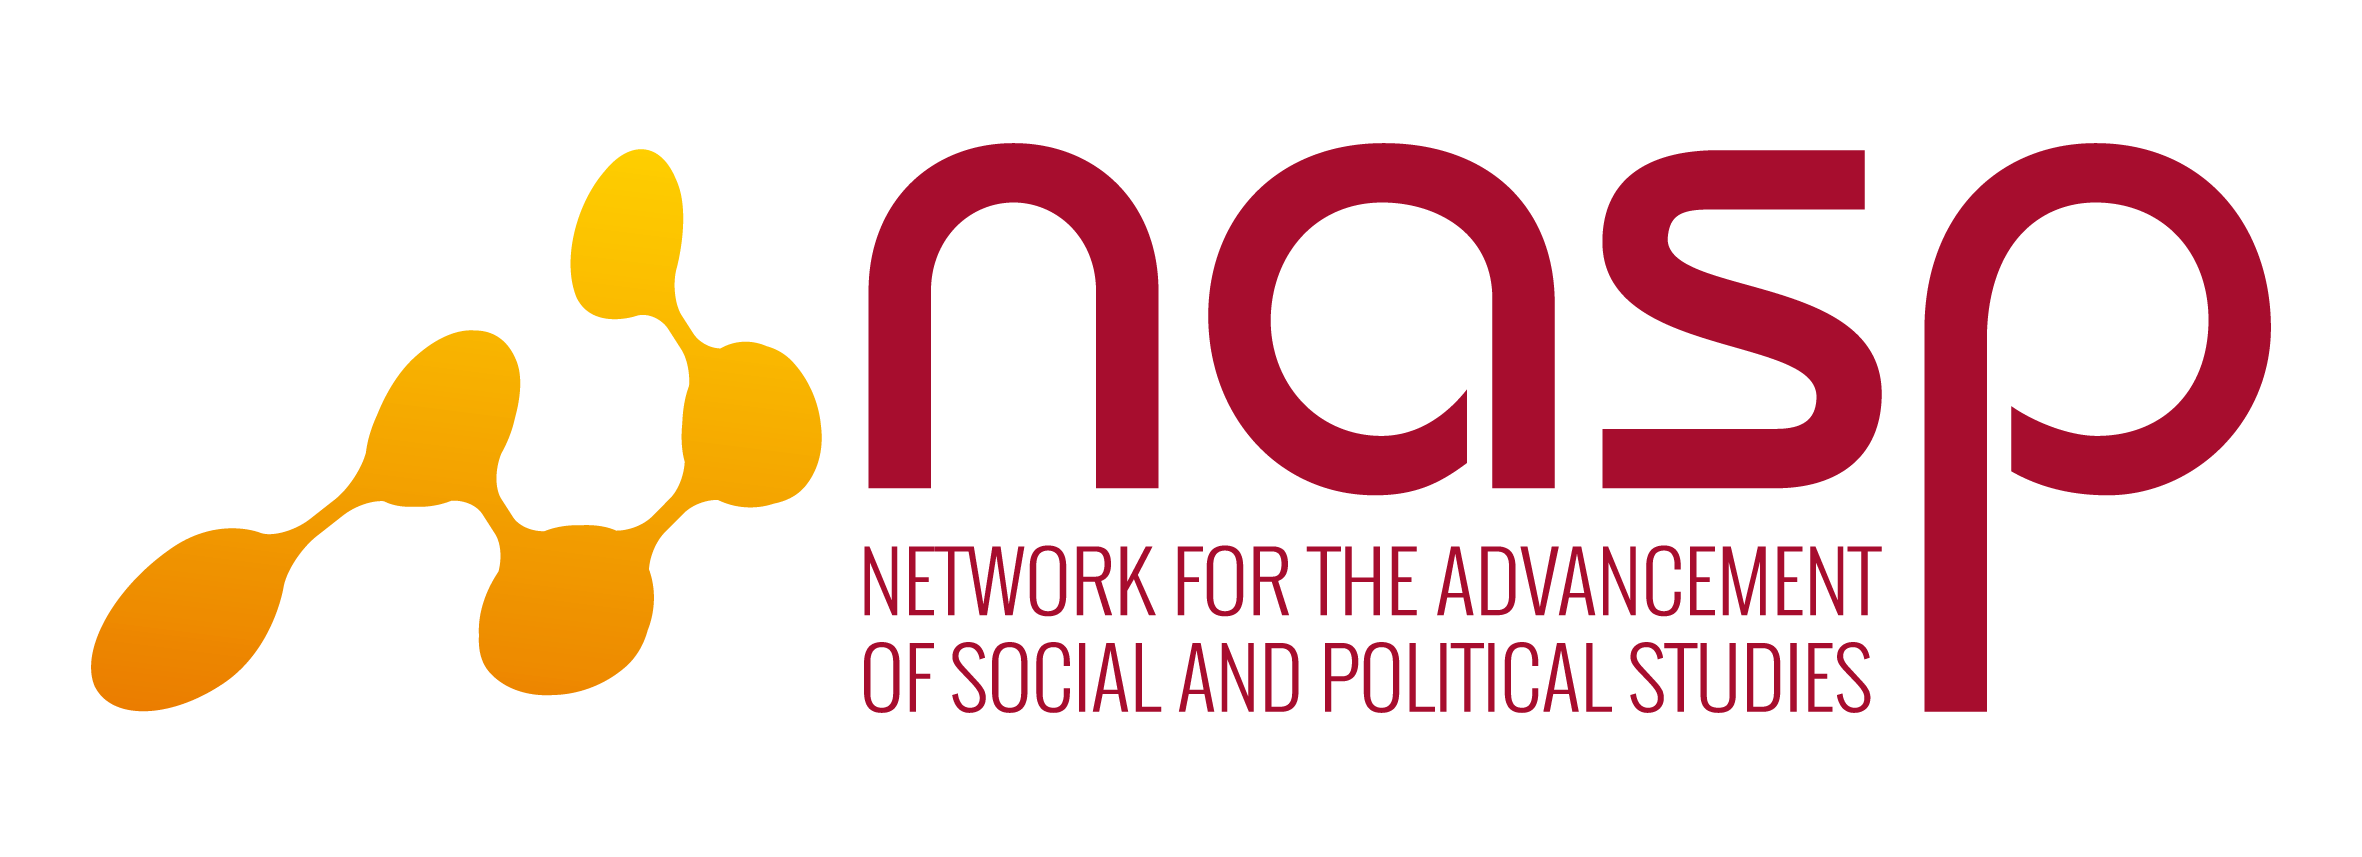 Network for the Advancement of Social and Political Studies (NASP)